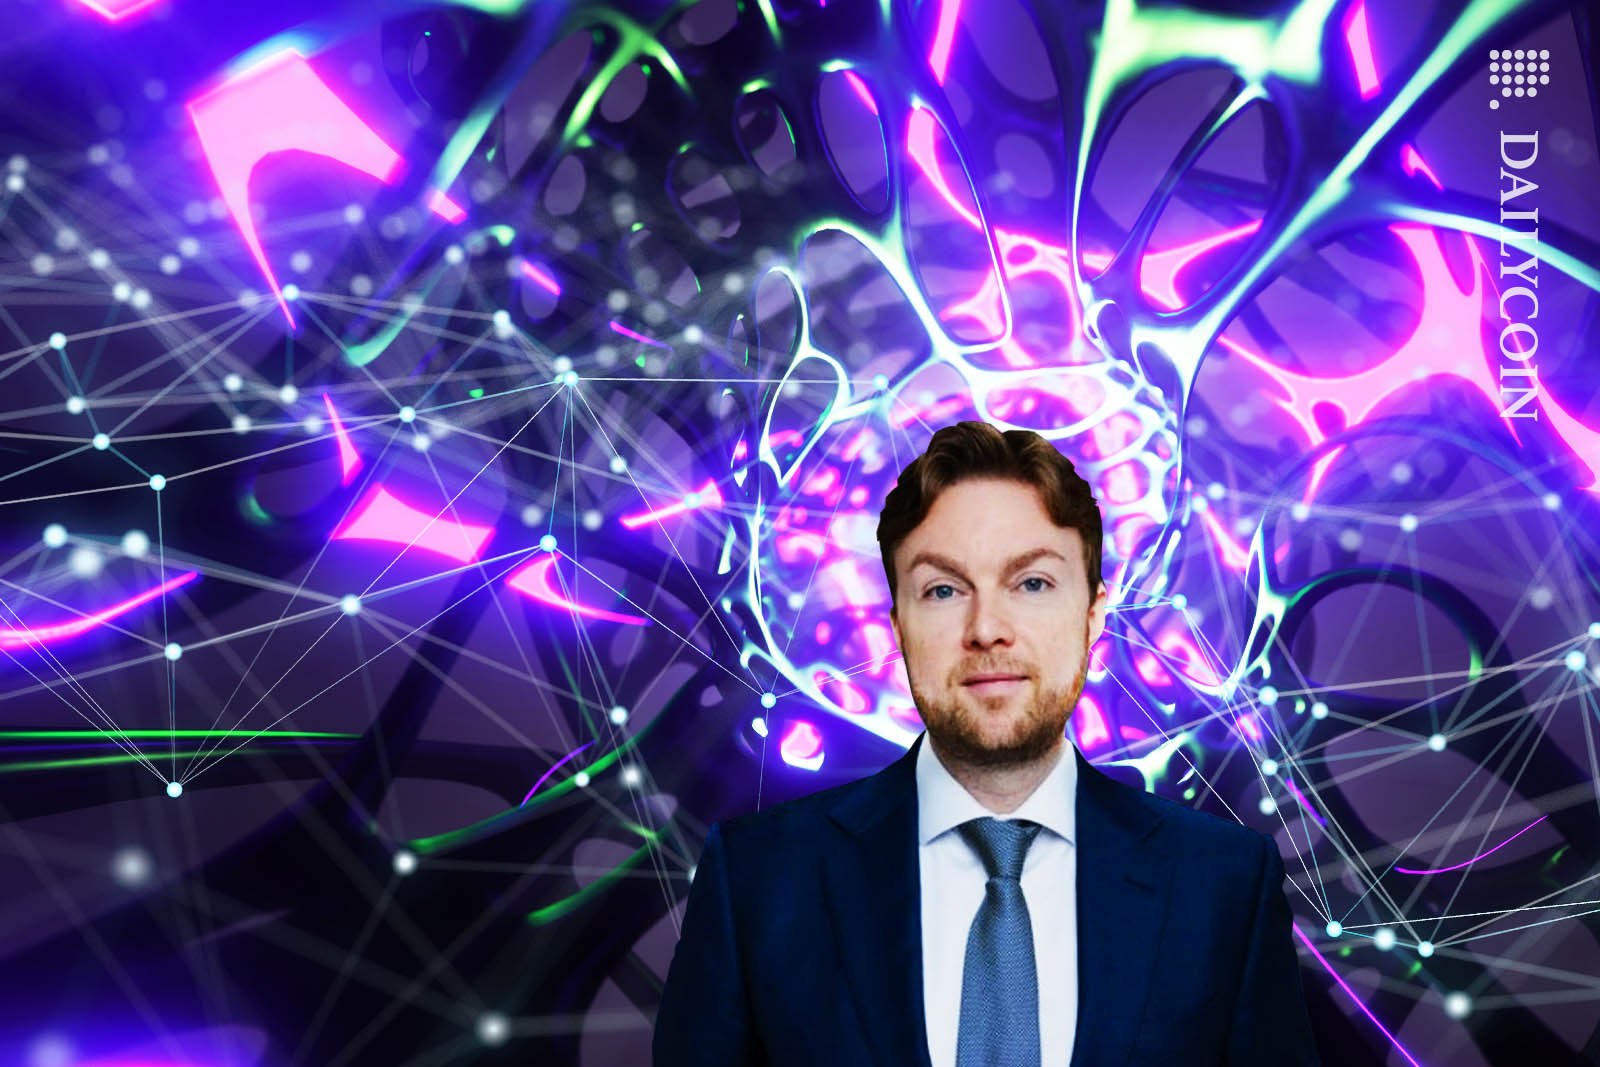 Markus Thielen Author of Crypto Titans "Everything is connected" posing in front of purple and blue abstract graphics suggesting connection.